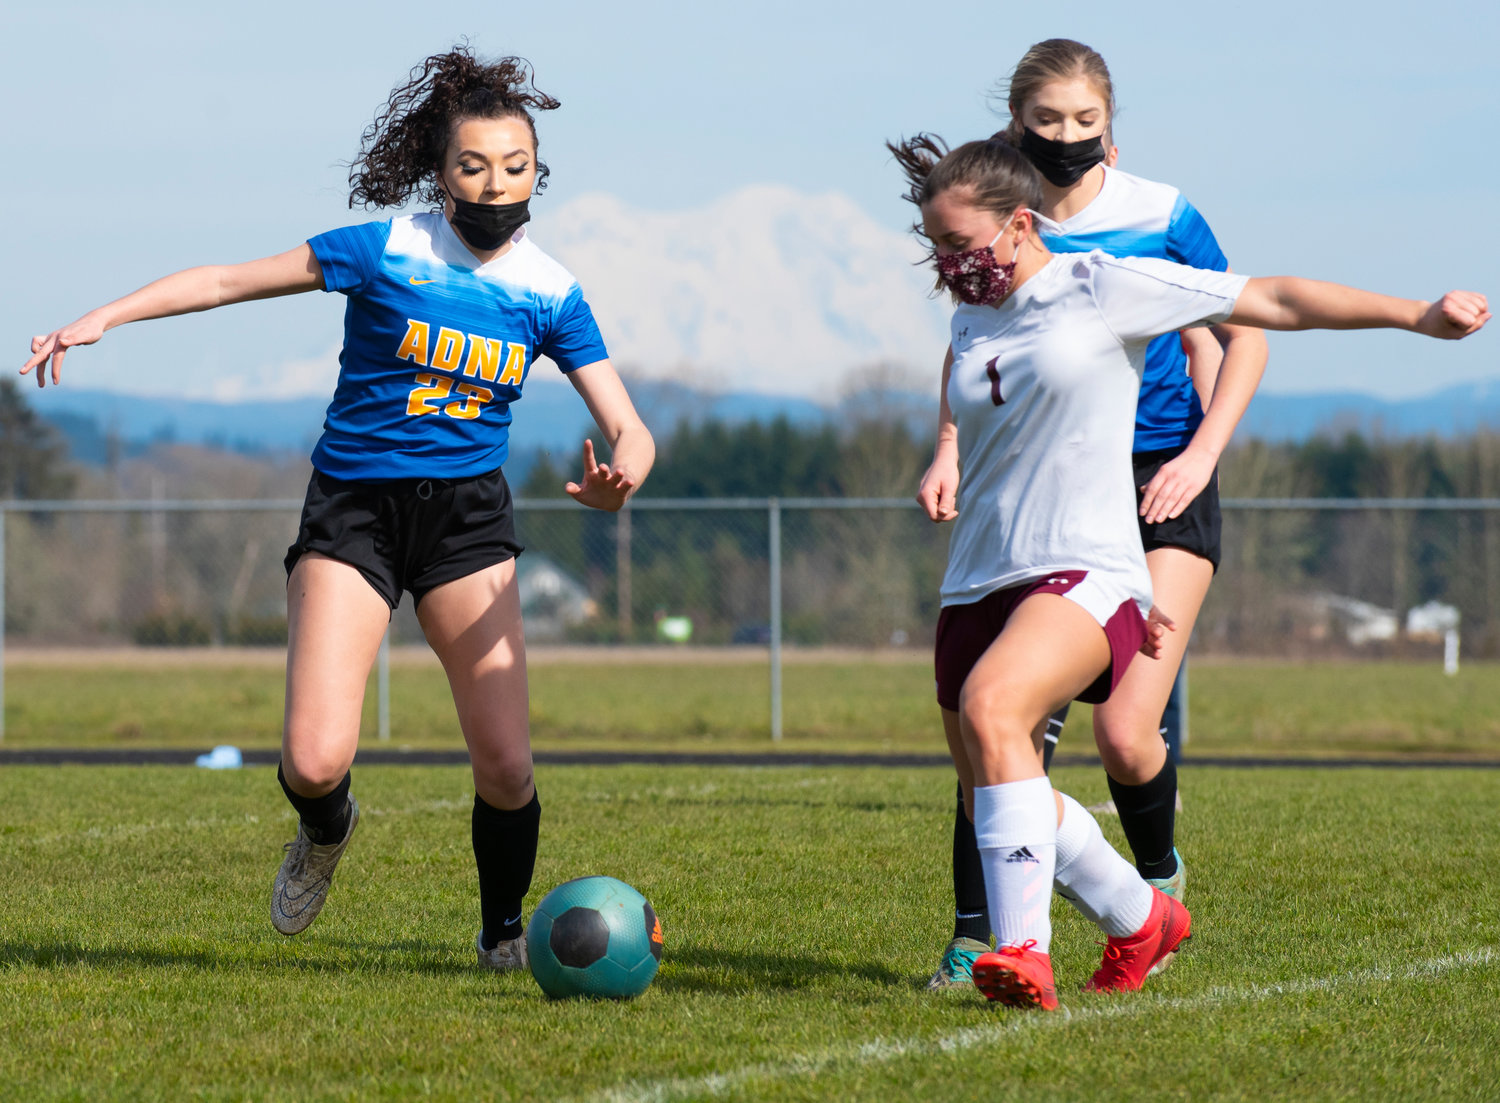 Adna's Presley Smith (23) races for the ball against a Stevenson defender on Saturday.